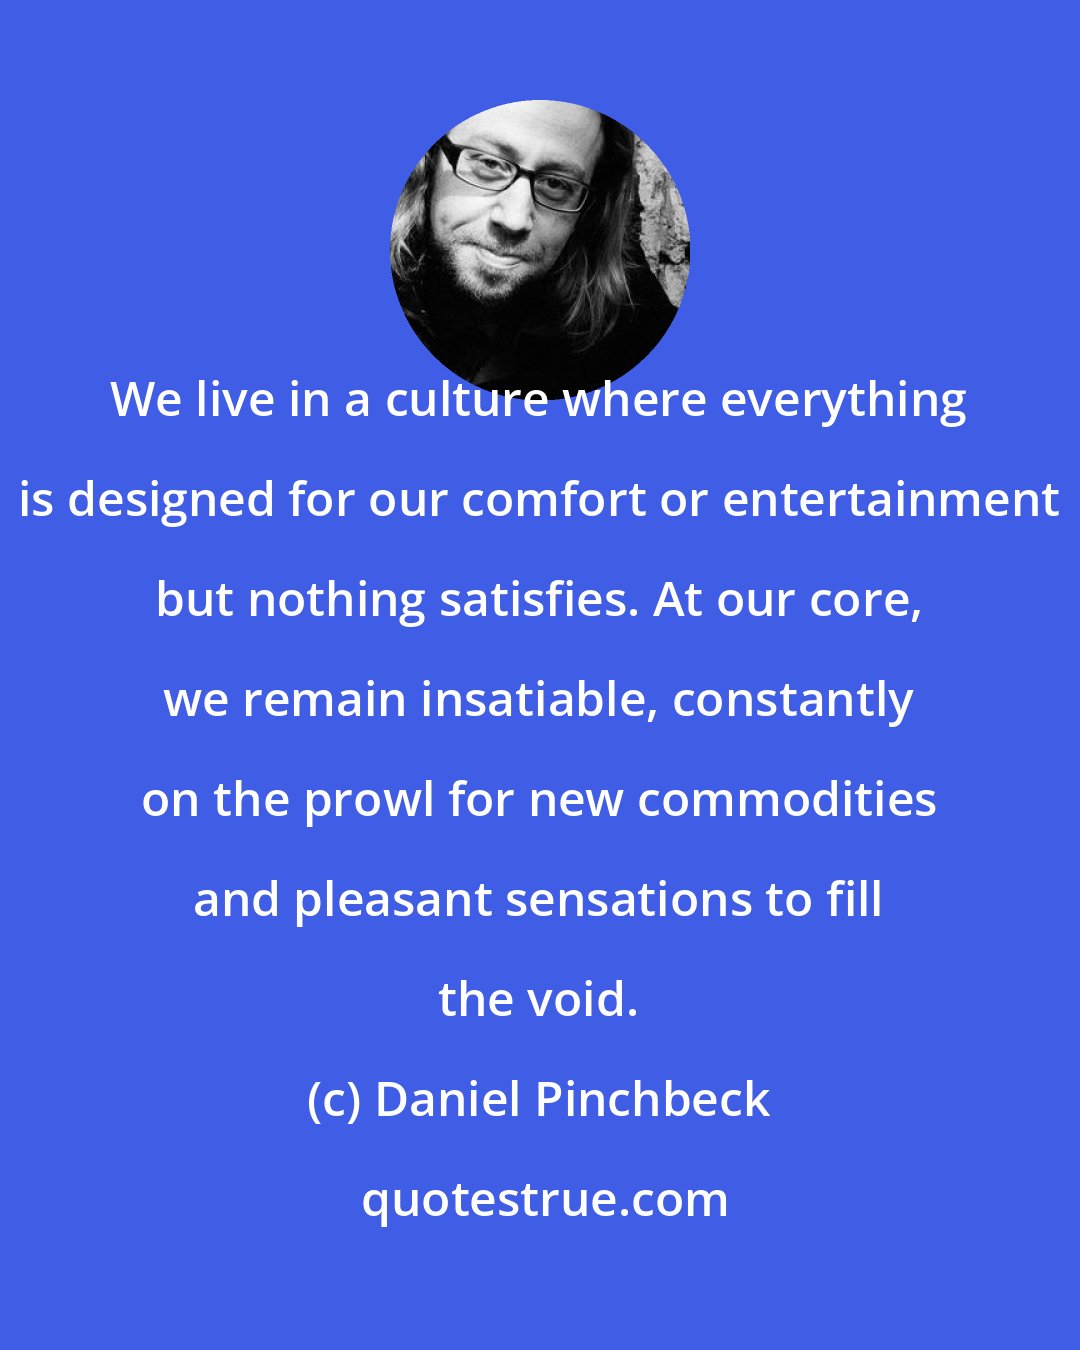 Daniel Pinchbeck: We live in a culture where everything is designed for our comfort or entertainment but nothing satisfies. At our core, we remain insatiable, constantly on the prowl for new commodities and pleasant sensations to fill the void.